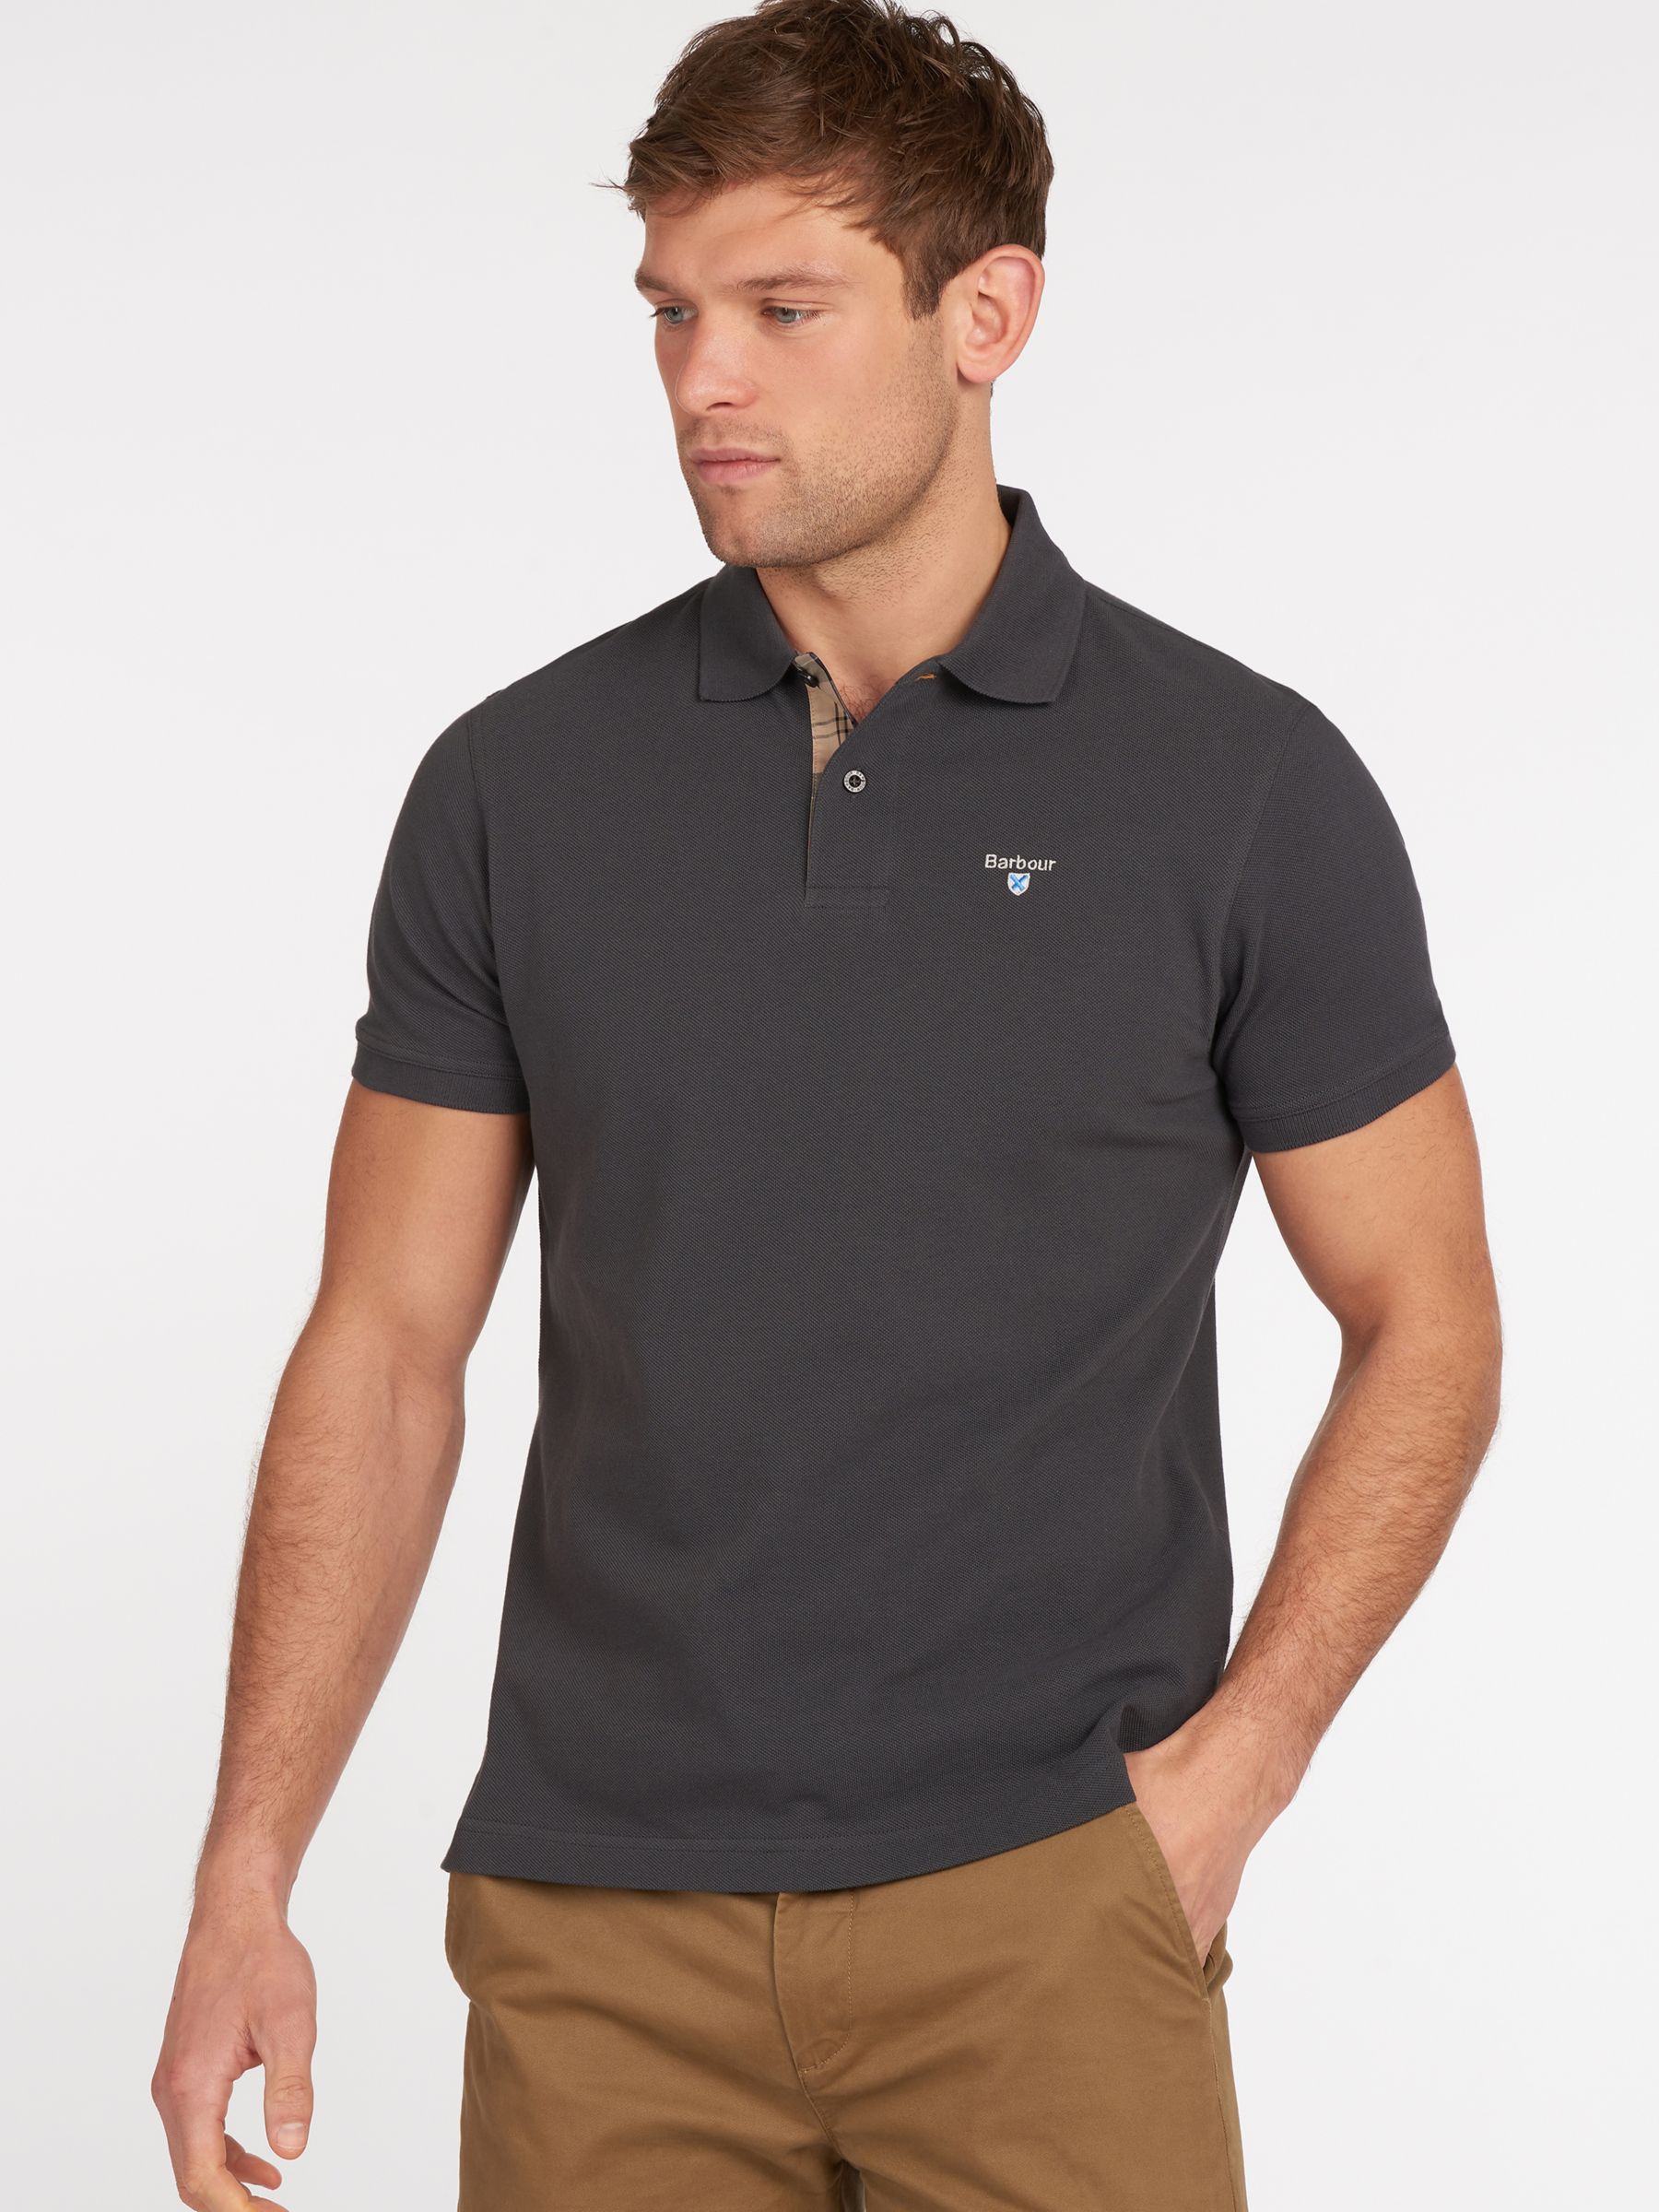 barbour navy polo shirt